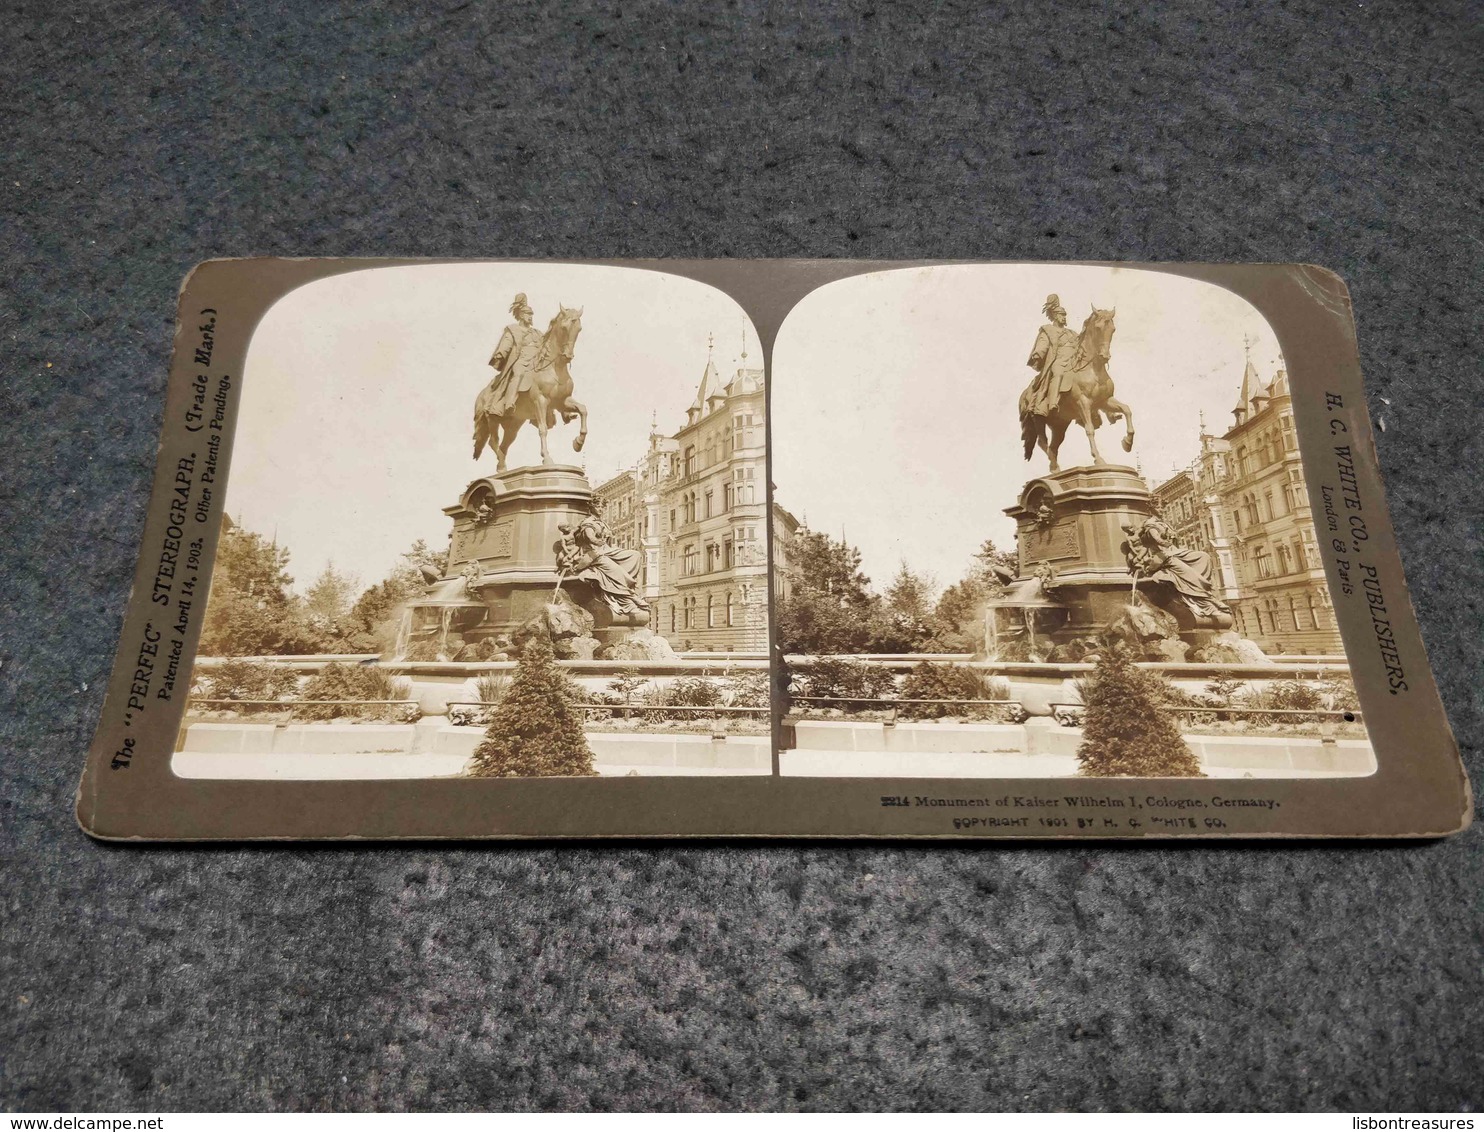 ANTIQUE STEREOSCOPIC REAL PHOTO GERMANY - MONUMENT OF KAISER WILHEIM I - COLOGNE Nº 2214 - Stereoskope - Stereobetrachter